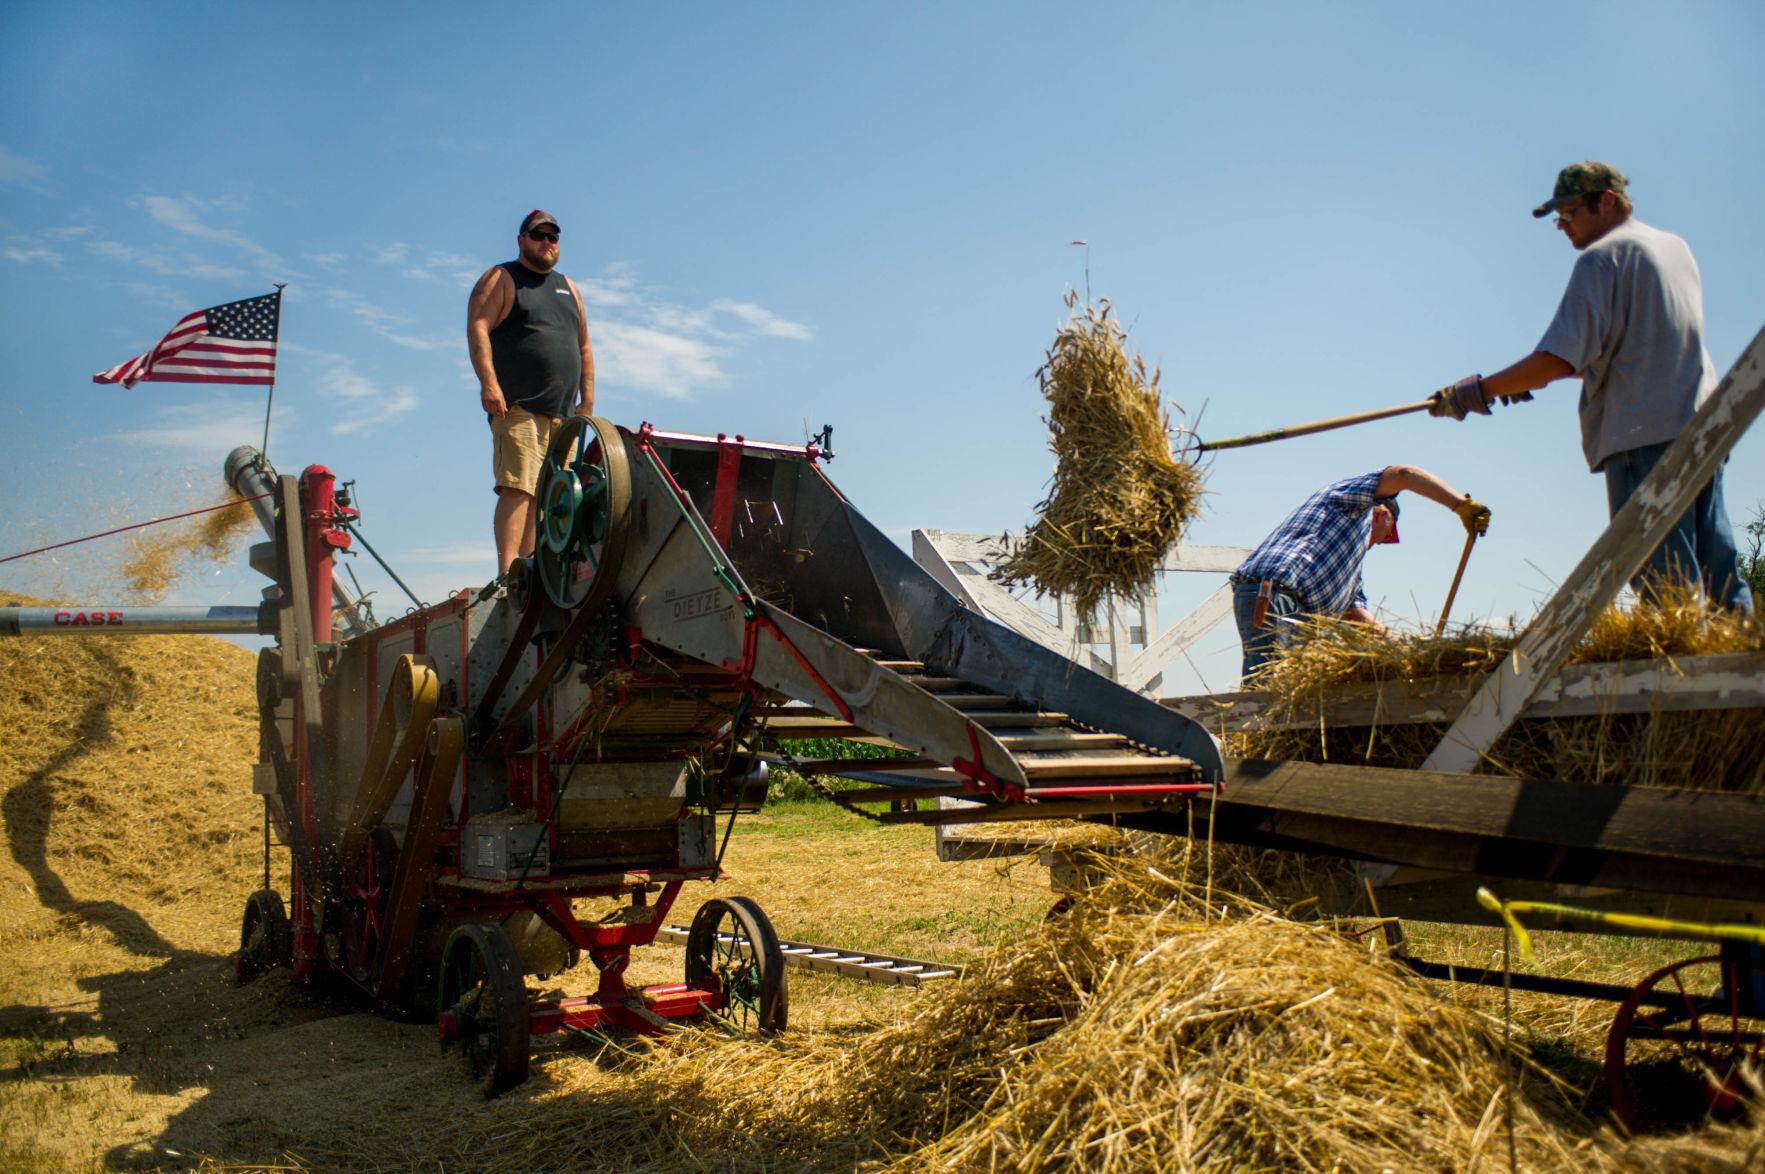 Camp Creek Threshers to host annual antique machinery and threshing